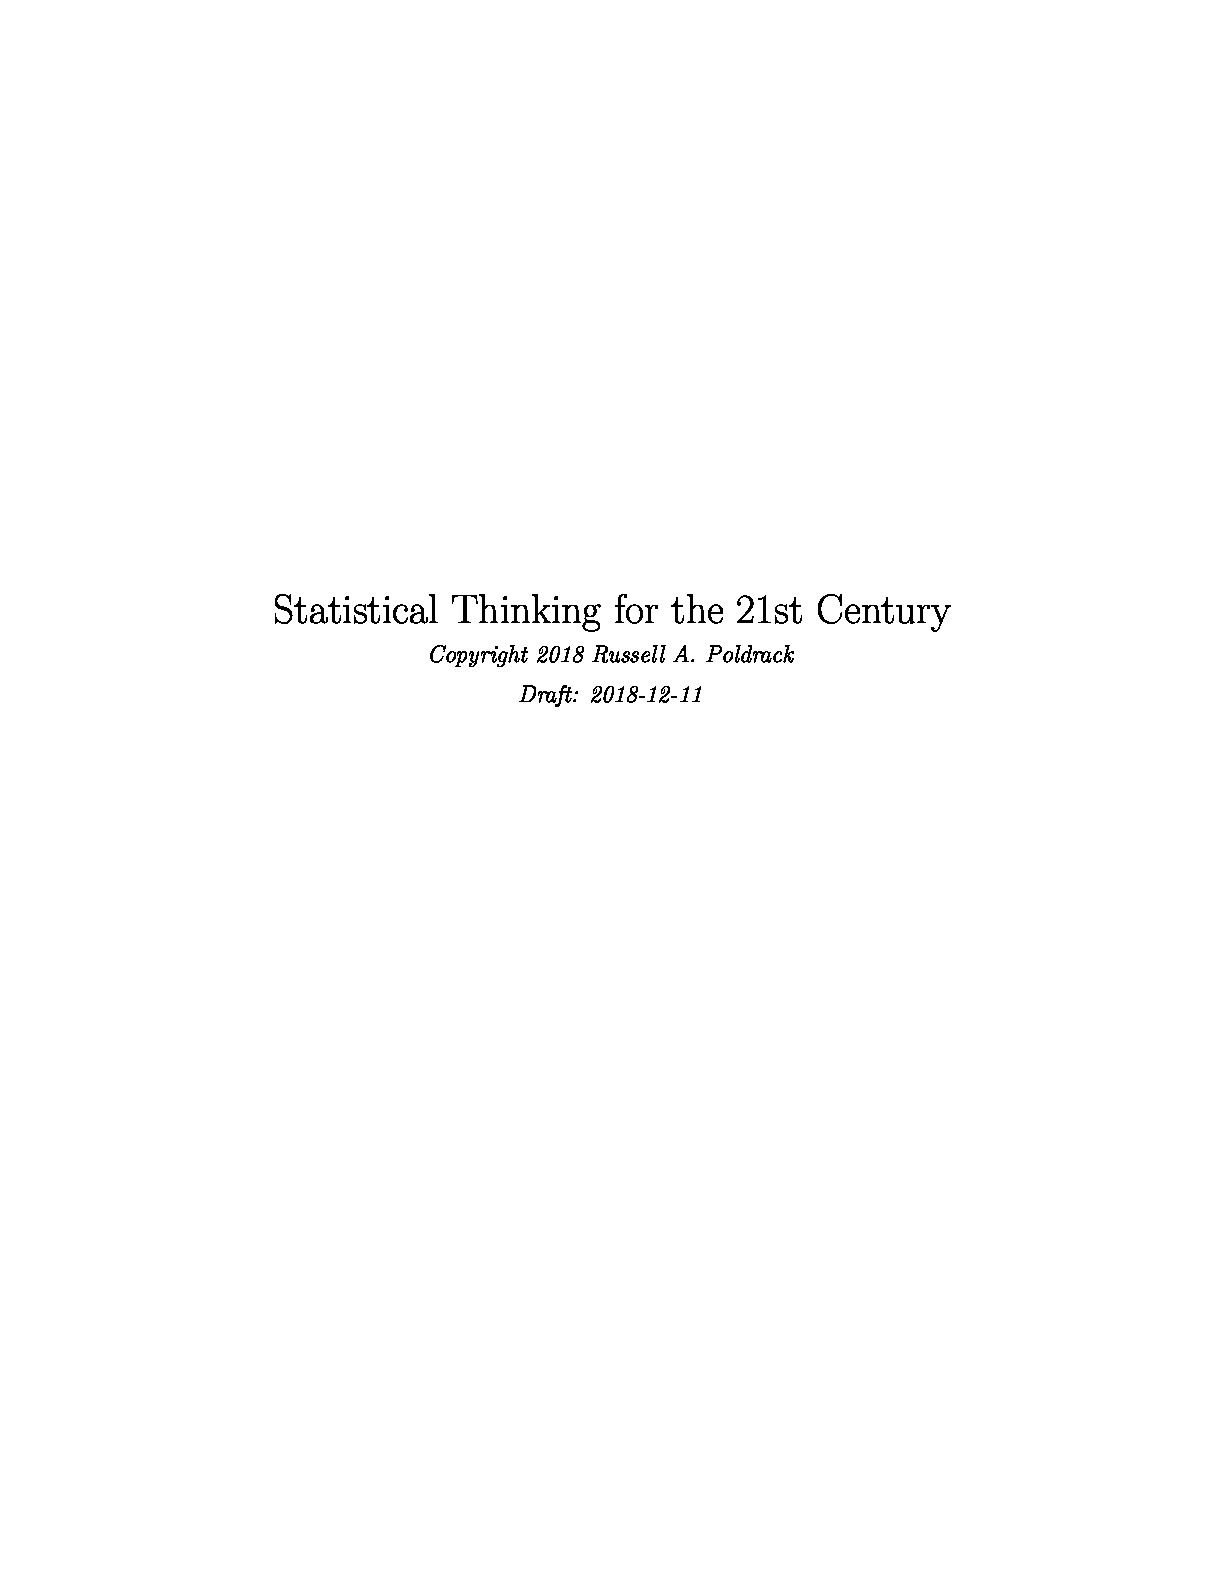 Statistical Thinking for the 21st Century-Draft-2018